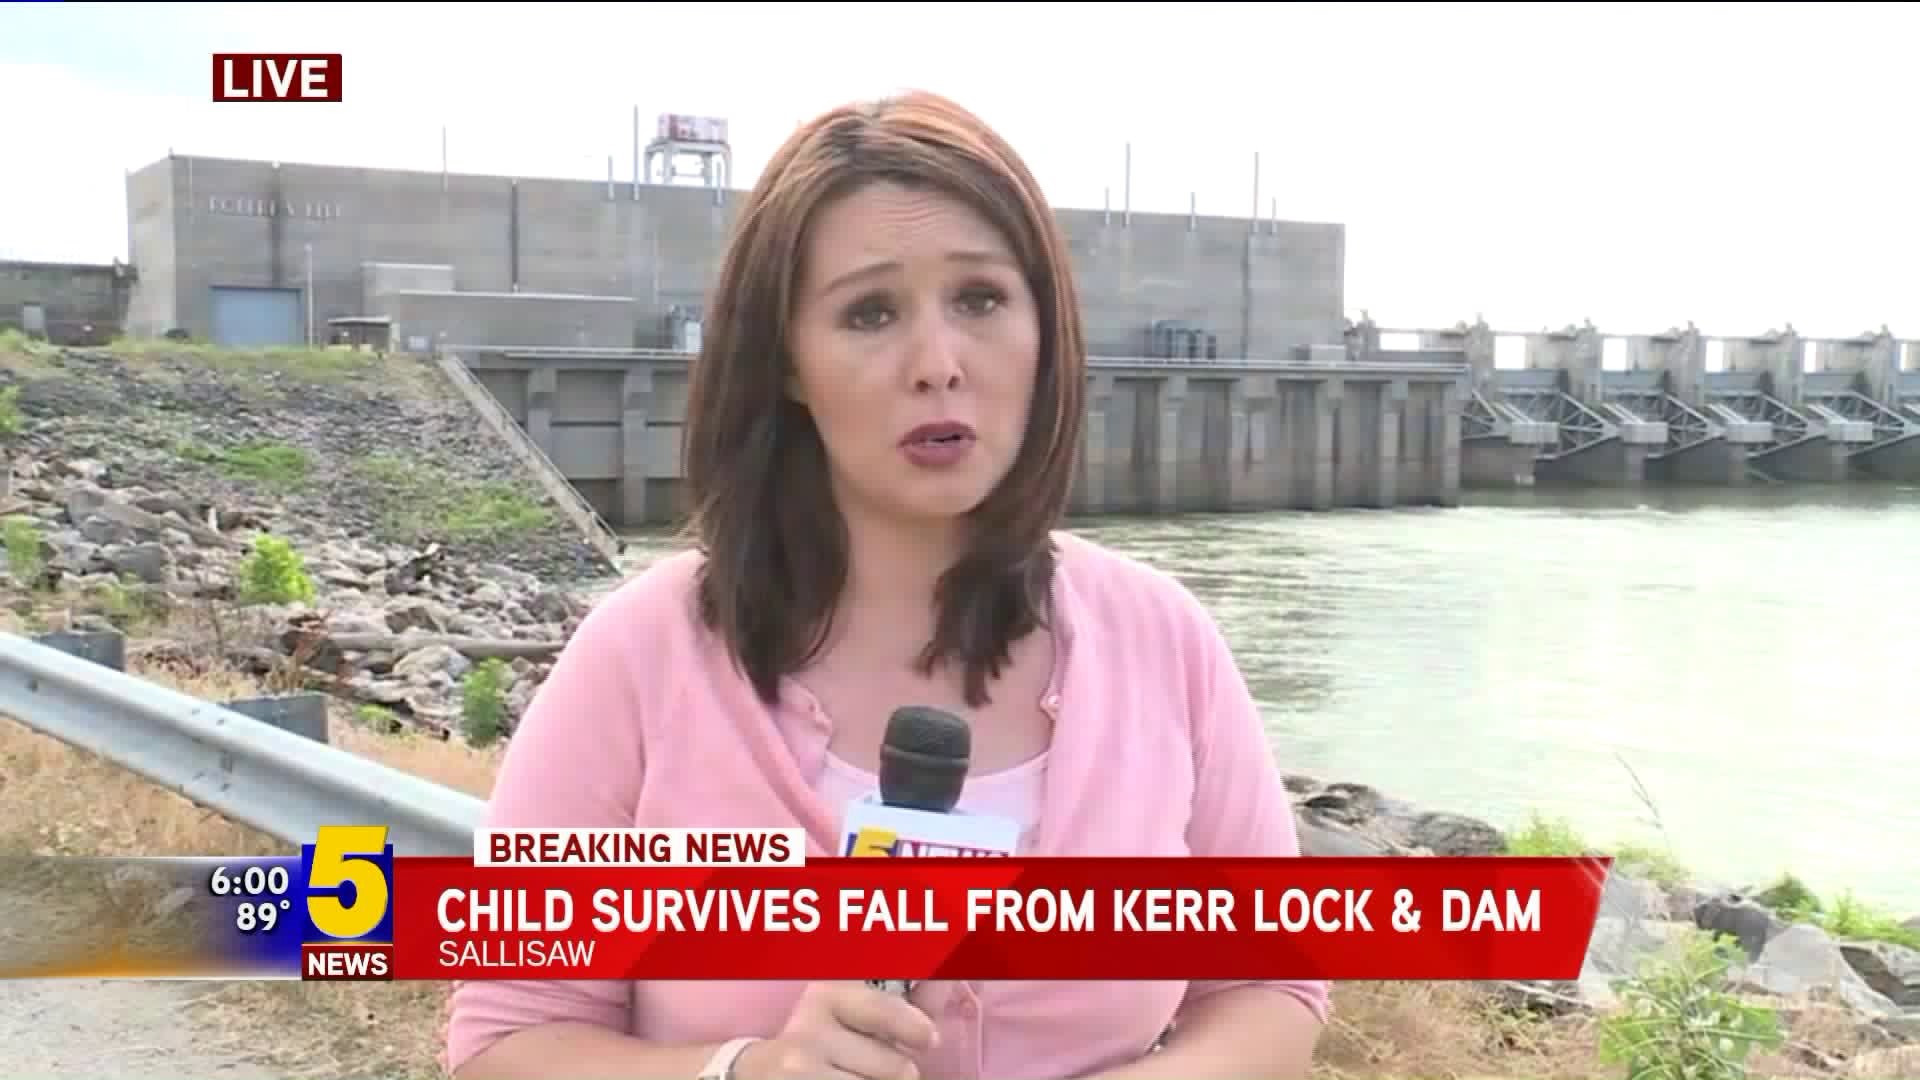 Child Survives Fall From Kerr Lock & Dam